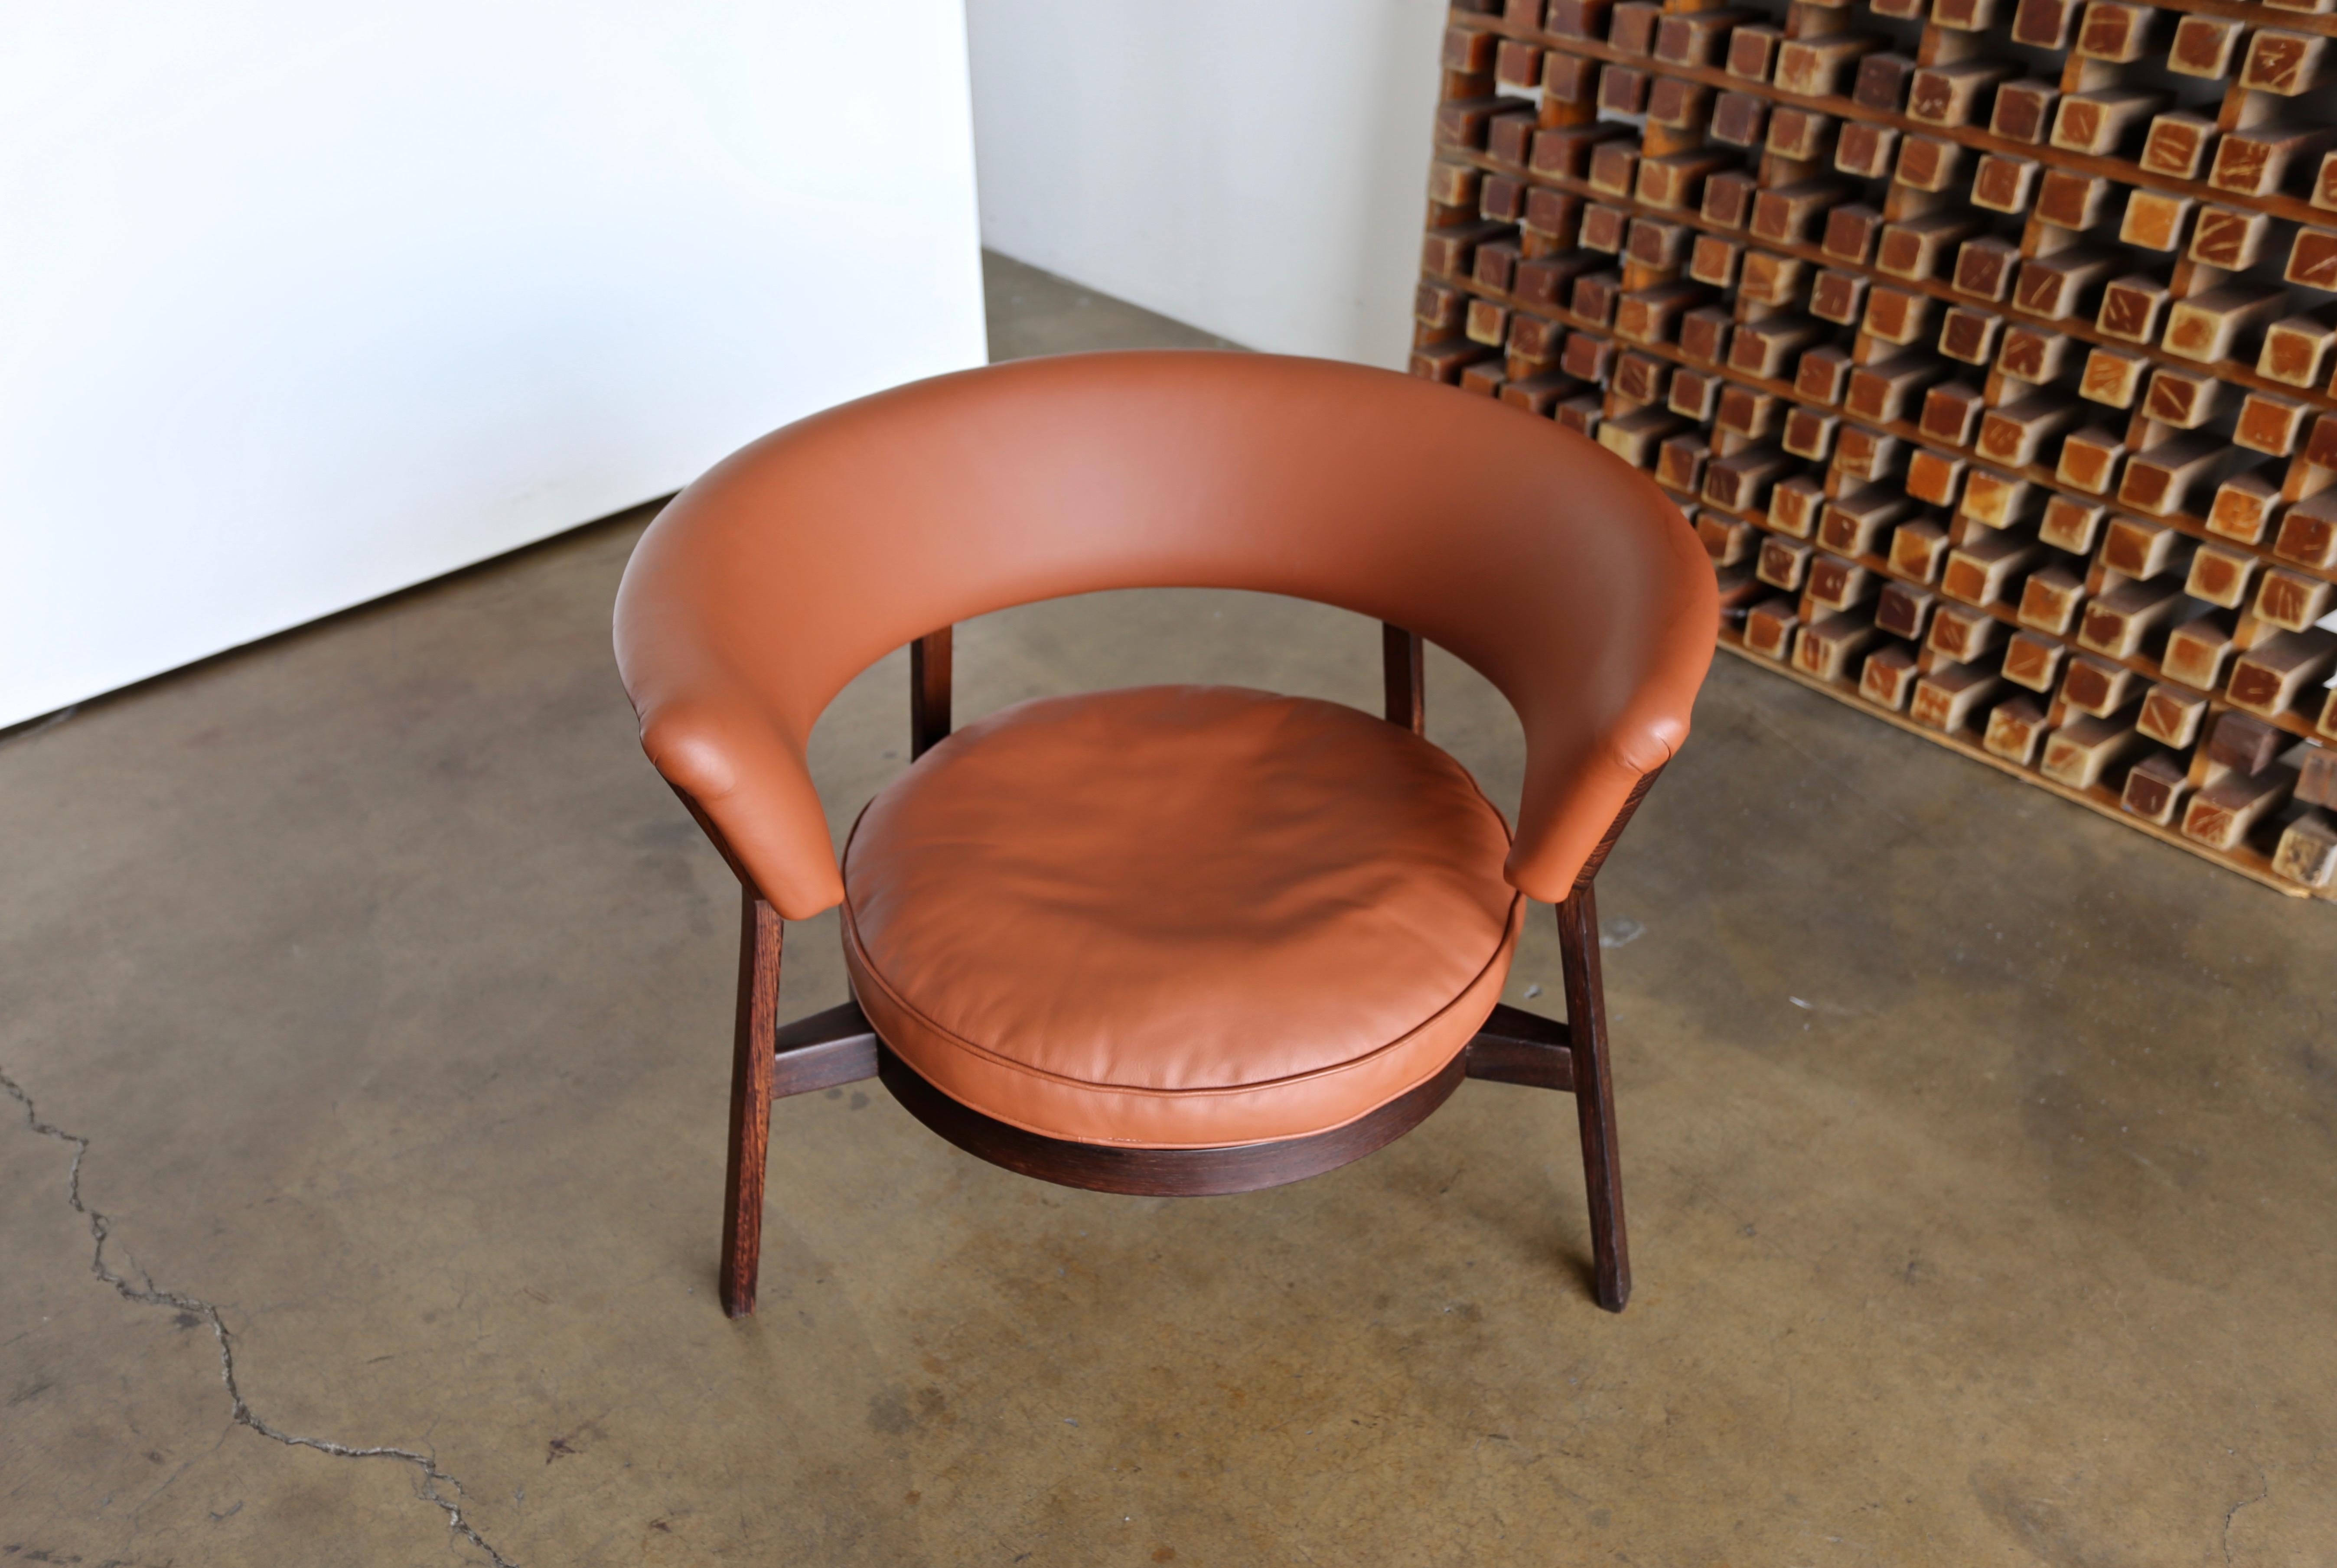 Rare Eugenio Gerli P28 lounge chair for Tecno Italy, circa 1958. Leather with a tiger wood frame.